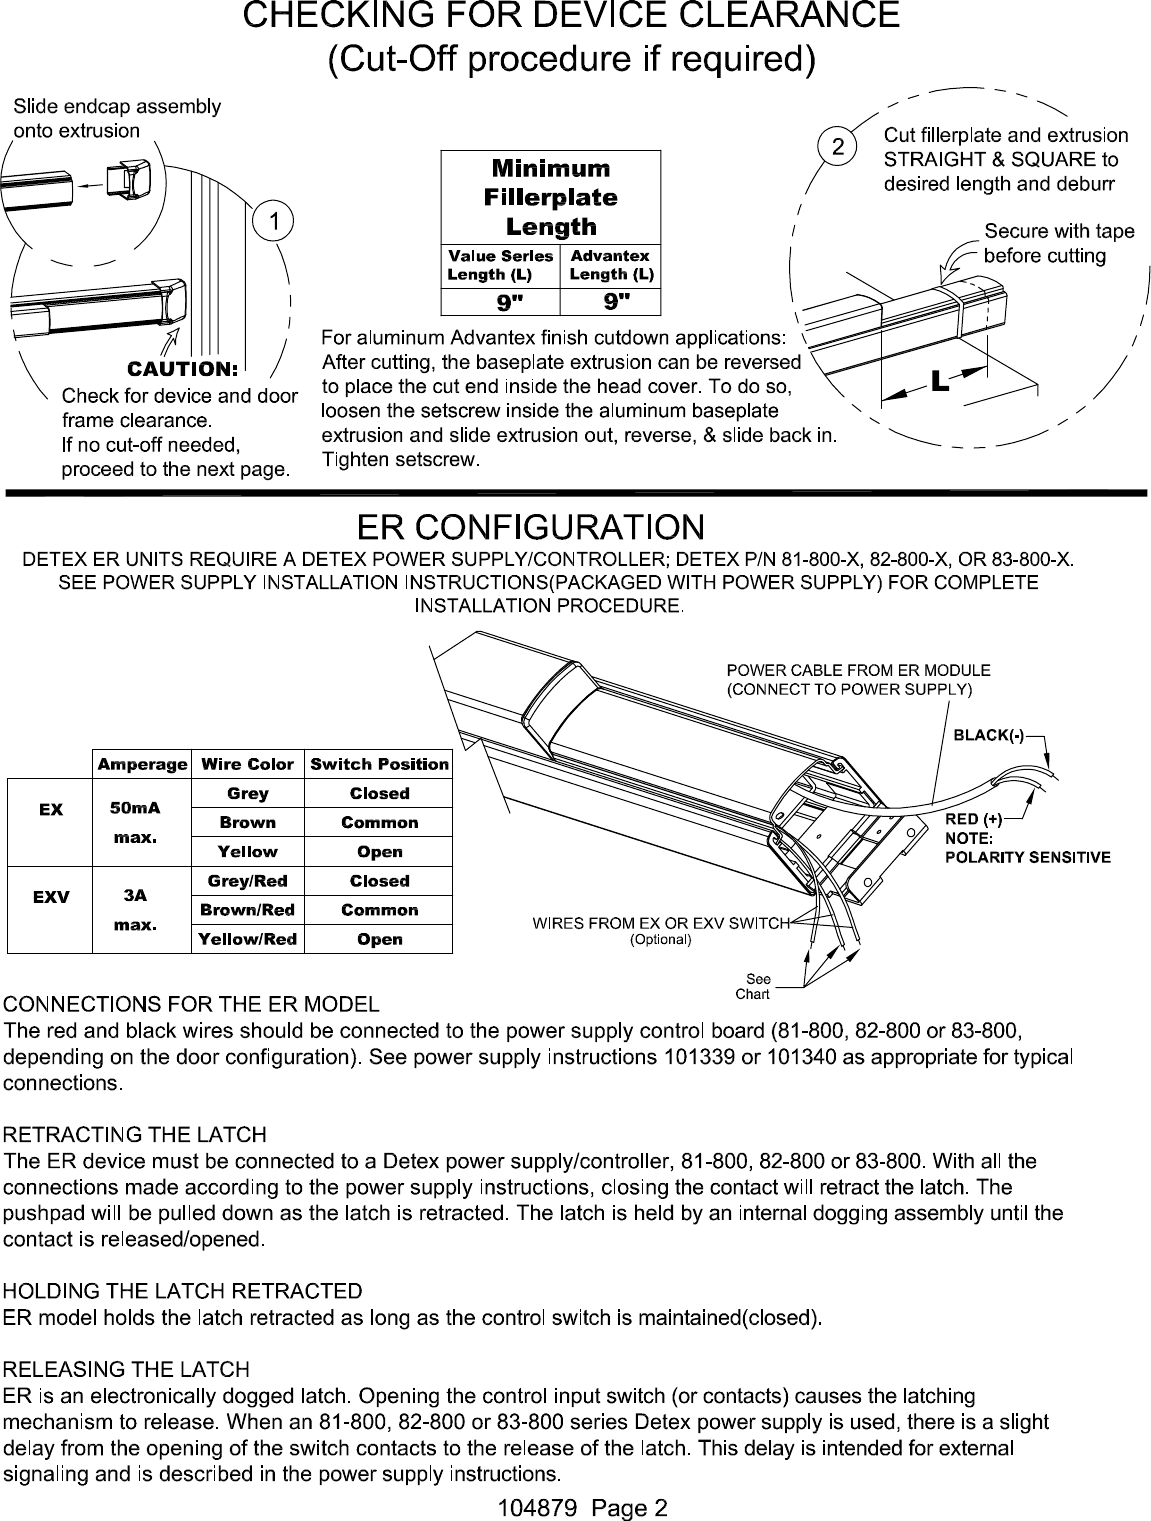 Detex R Electrical Instructions For Electric Dogging Electric Latch Retraction Rim Svr Cvr Mortise 104879